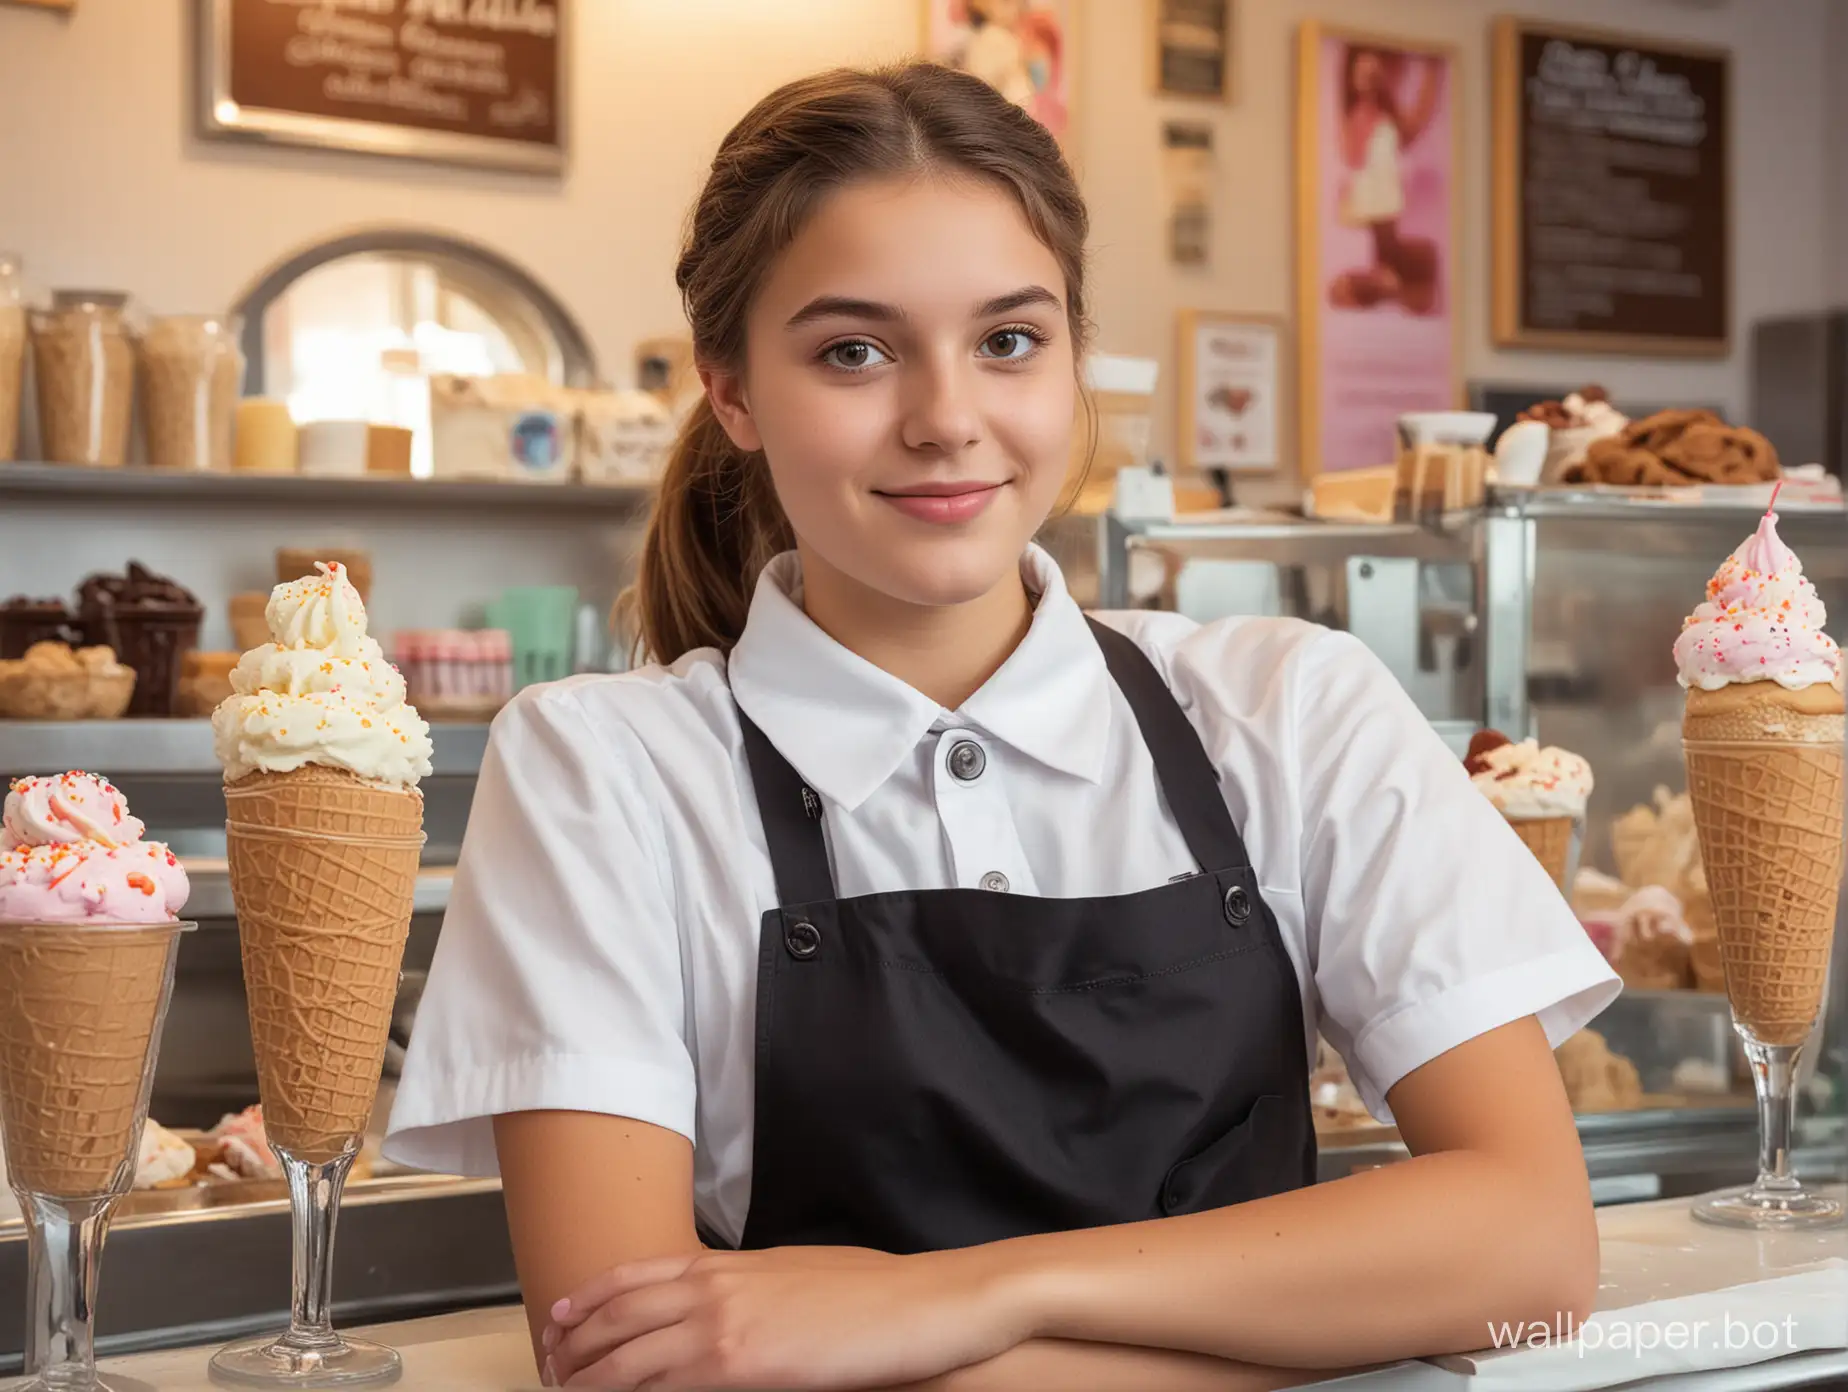 Teenage girl working in an ice-cream parlour, she is wearing a uniform. detailed features, sharp image